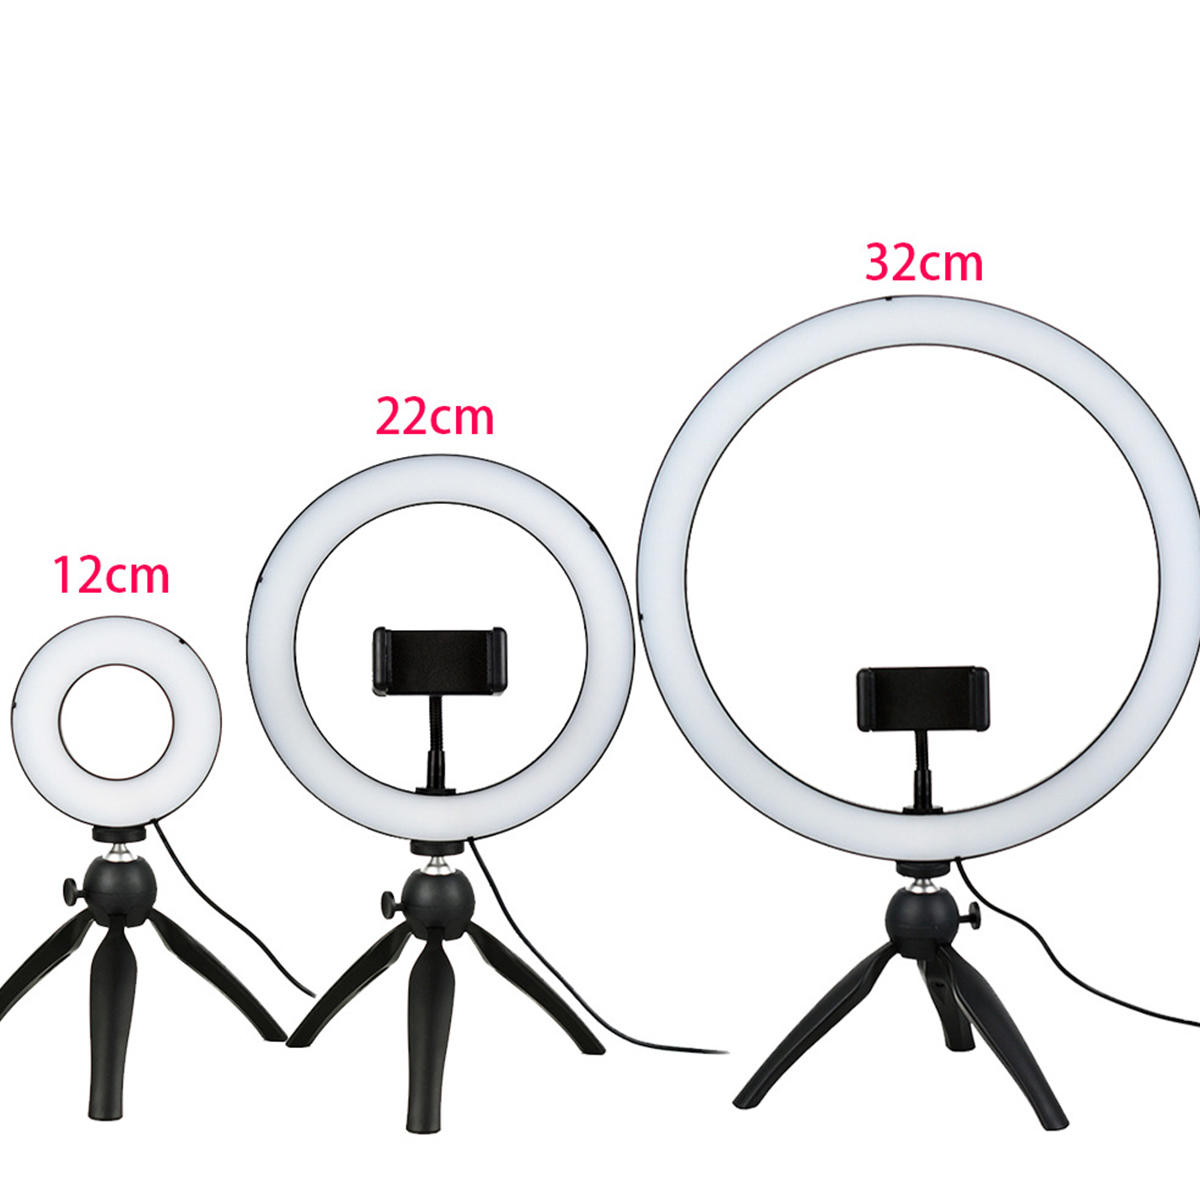 Ring-Light-LED-Makeup-Ring-Lamp-USB-Portable-Selfie-Ring-Lamp-Phone-Holder-Tripod-Stand-Photography--1579907-8